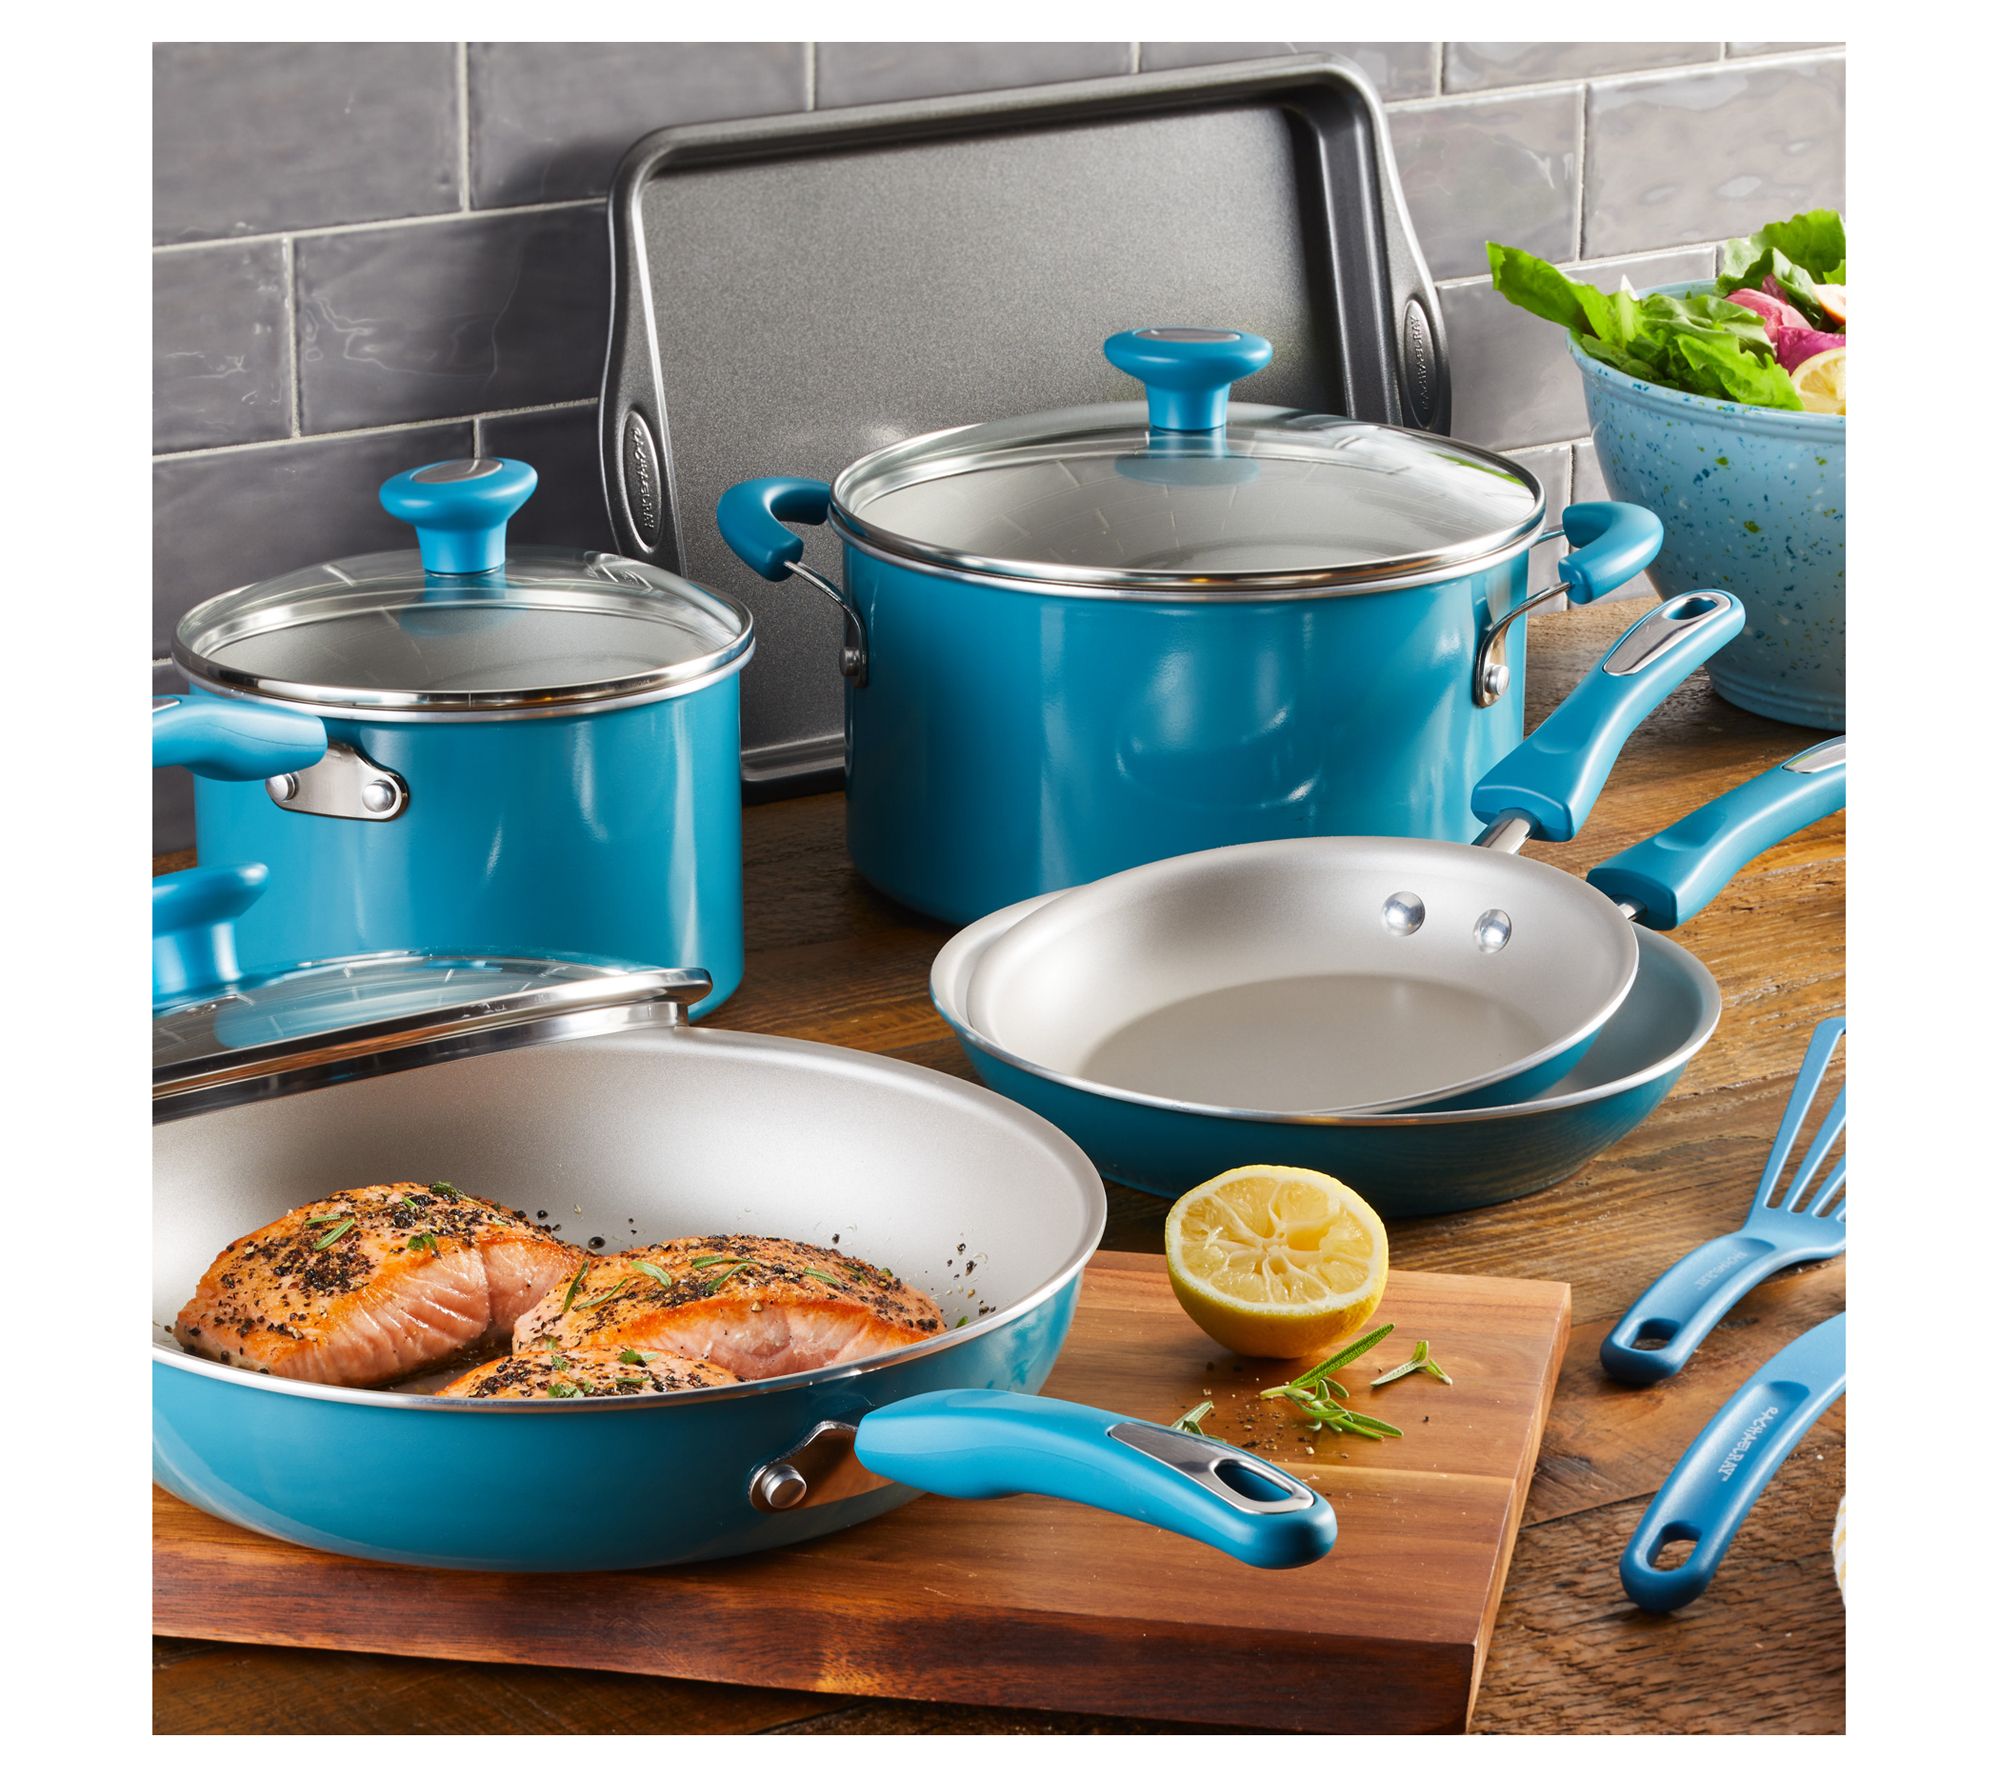 Rachael Ray Get Cooking! Nonstick Cookware Set,12pc, Turquois 